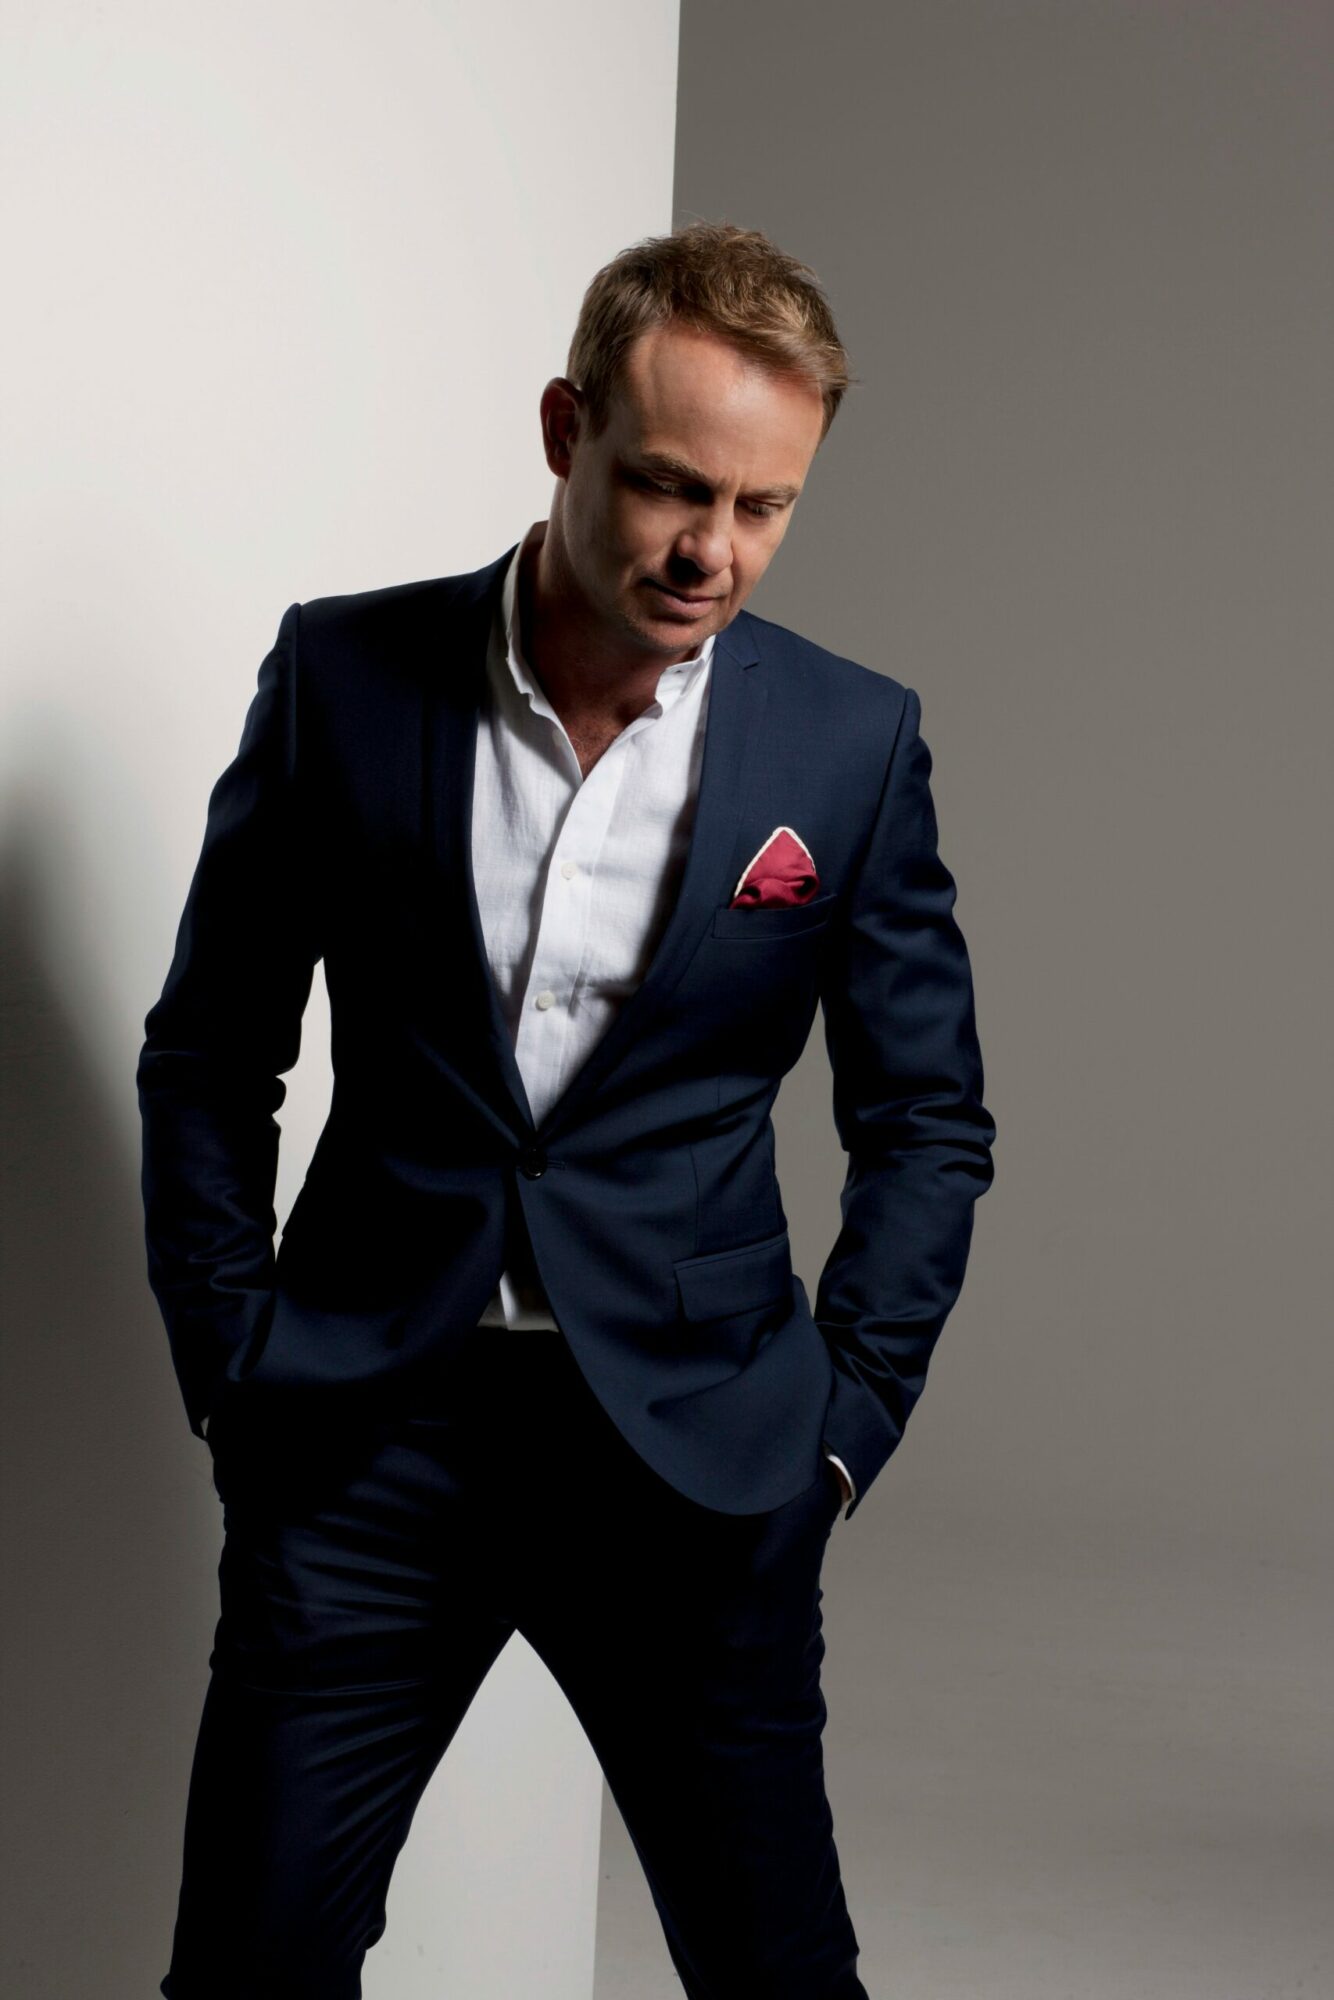 Image name Jason Donovan DOIN FINE 25 at York Barbican York scaled the 29 image from the post Jason Donovan - DOIN' FINE 25 at York Barbican, York in Yorkshire.com.